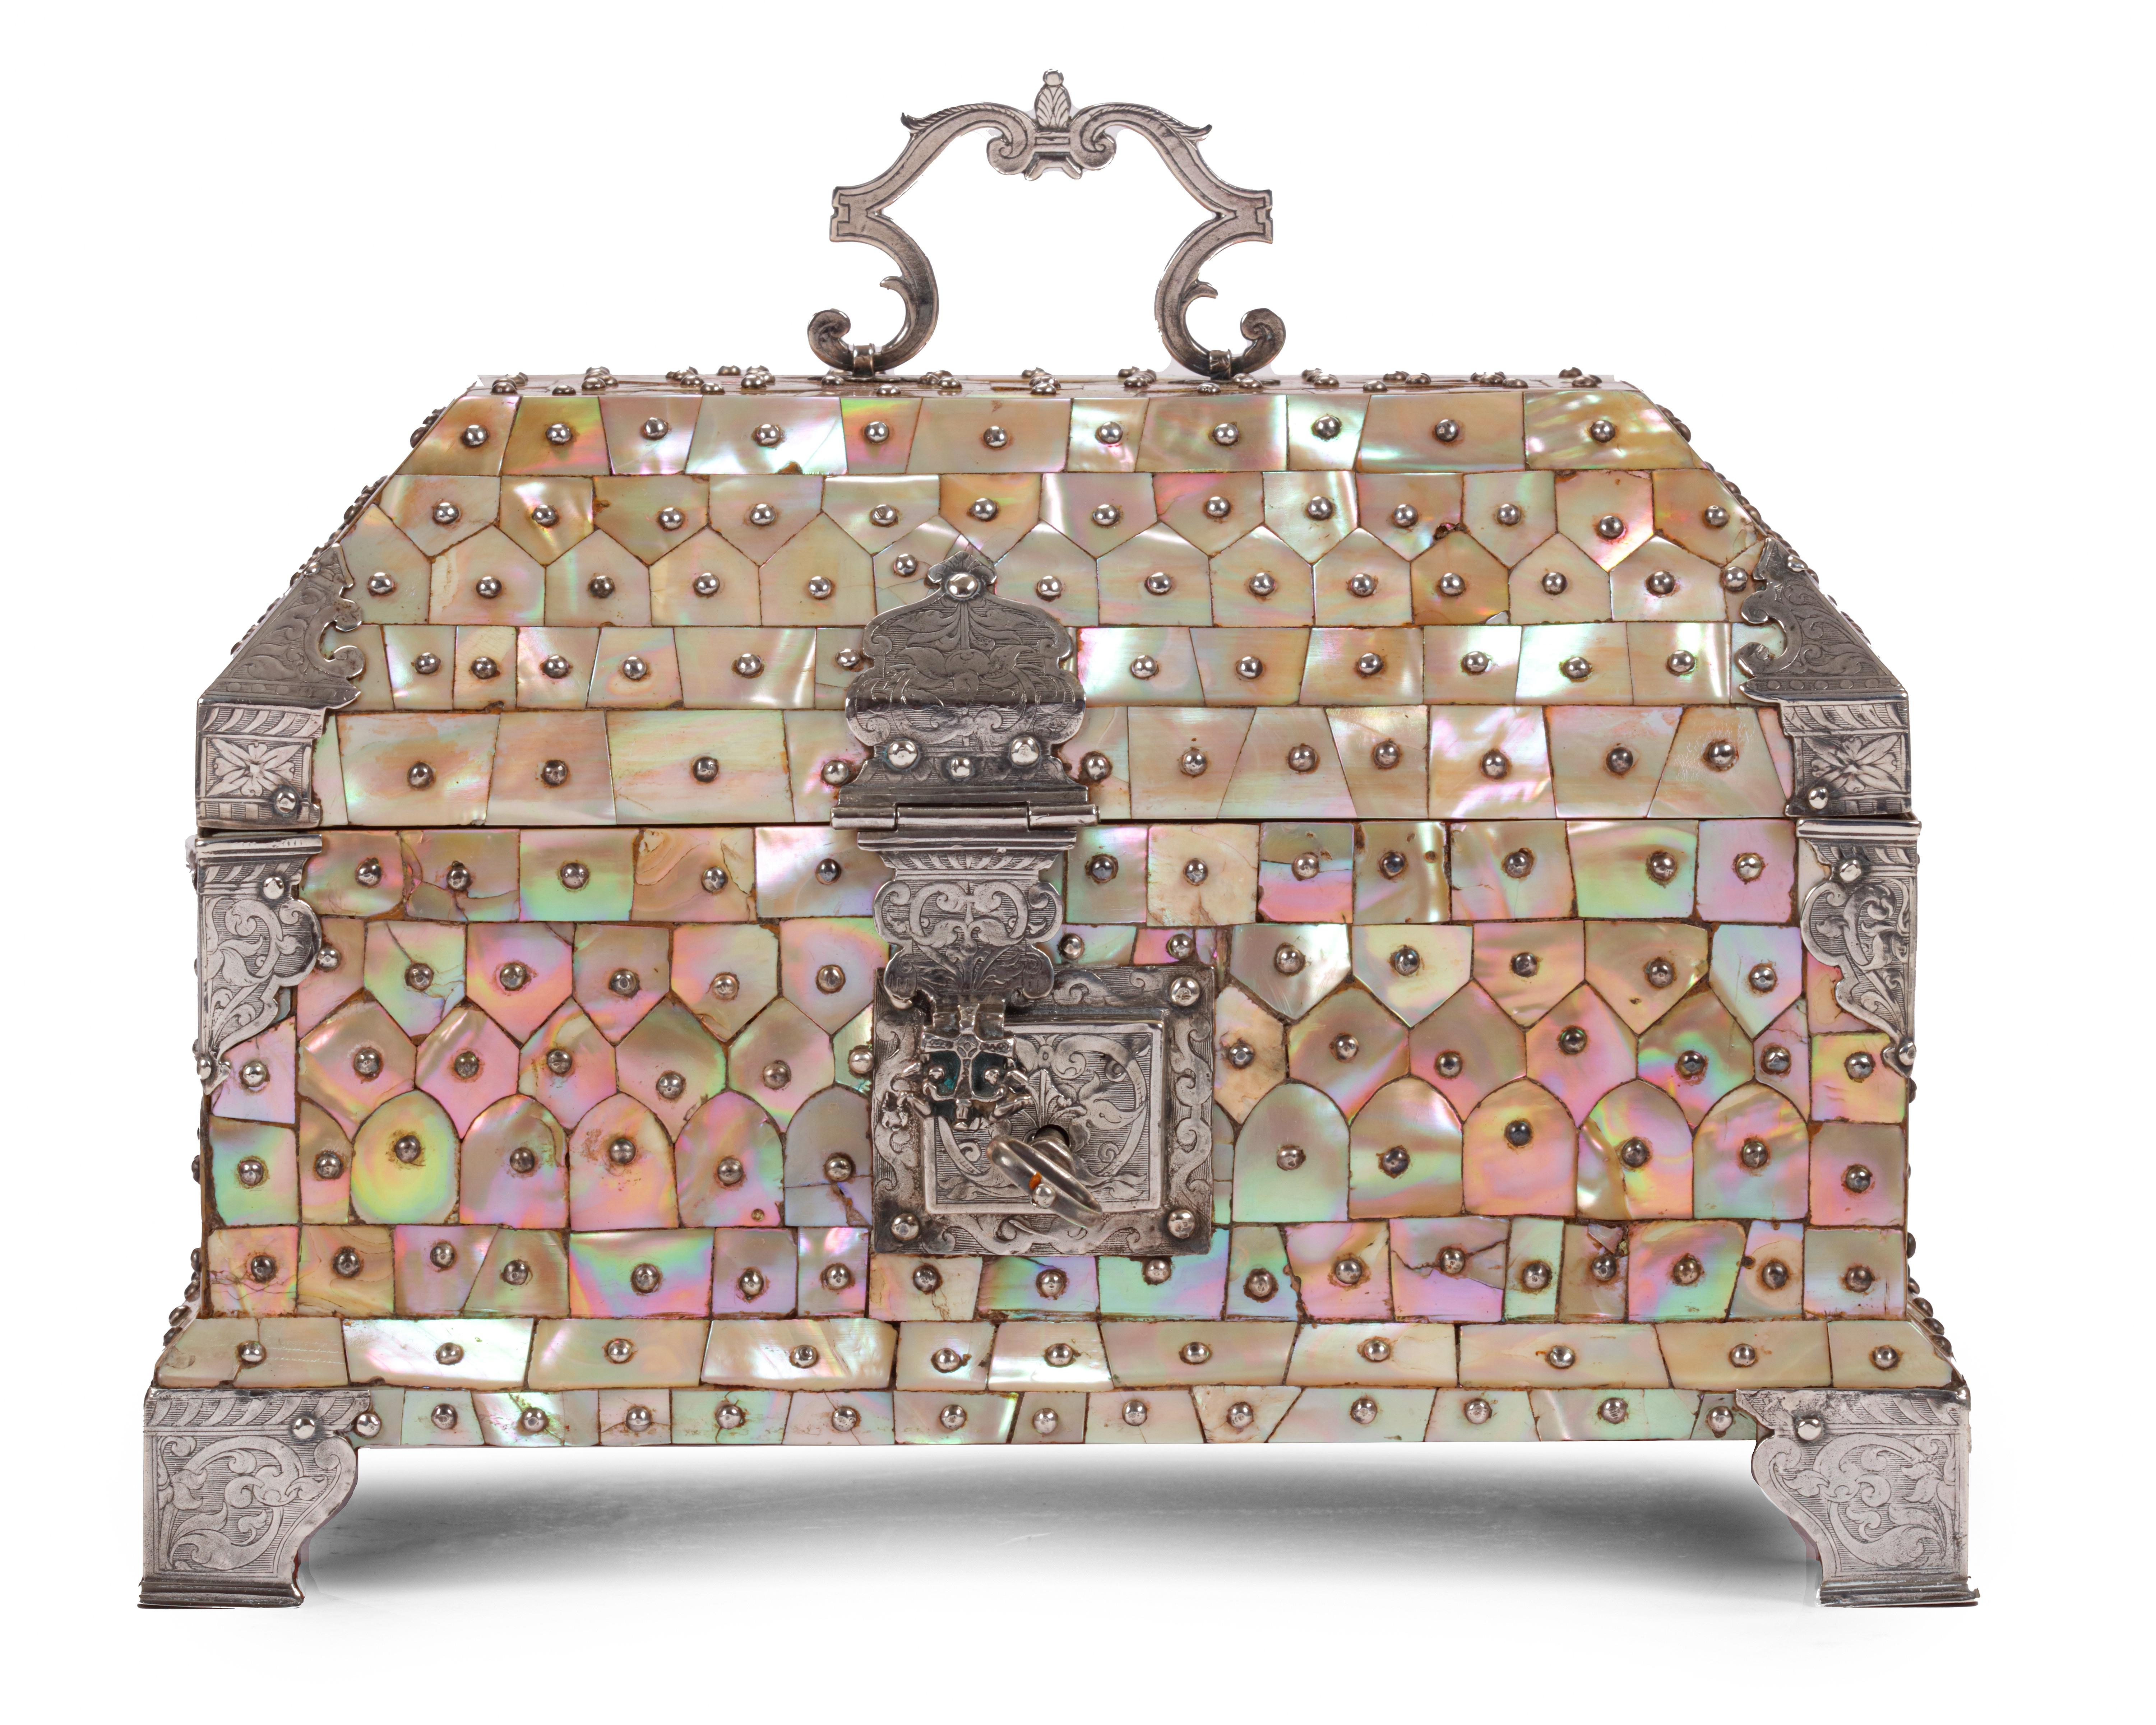 An exceptional Indo-Portuguese colonial mother-of-pearl veneered casket with silver mounts

India, Gujarat, 2nd half of the 16th century, the silver mounts Goa or probably Lisbon

Measures: H. 16 x W. 24.6 x D. 16.1 cm

An exceptional Gujarati